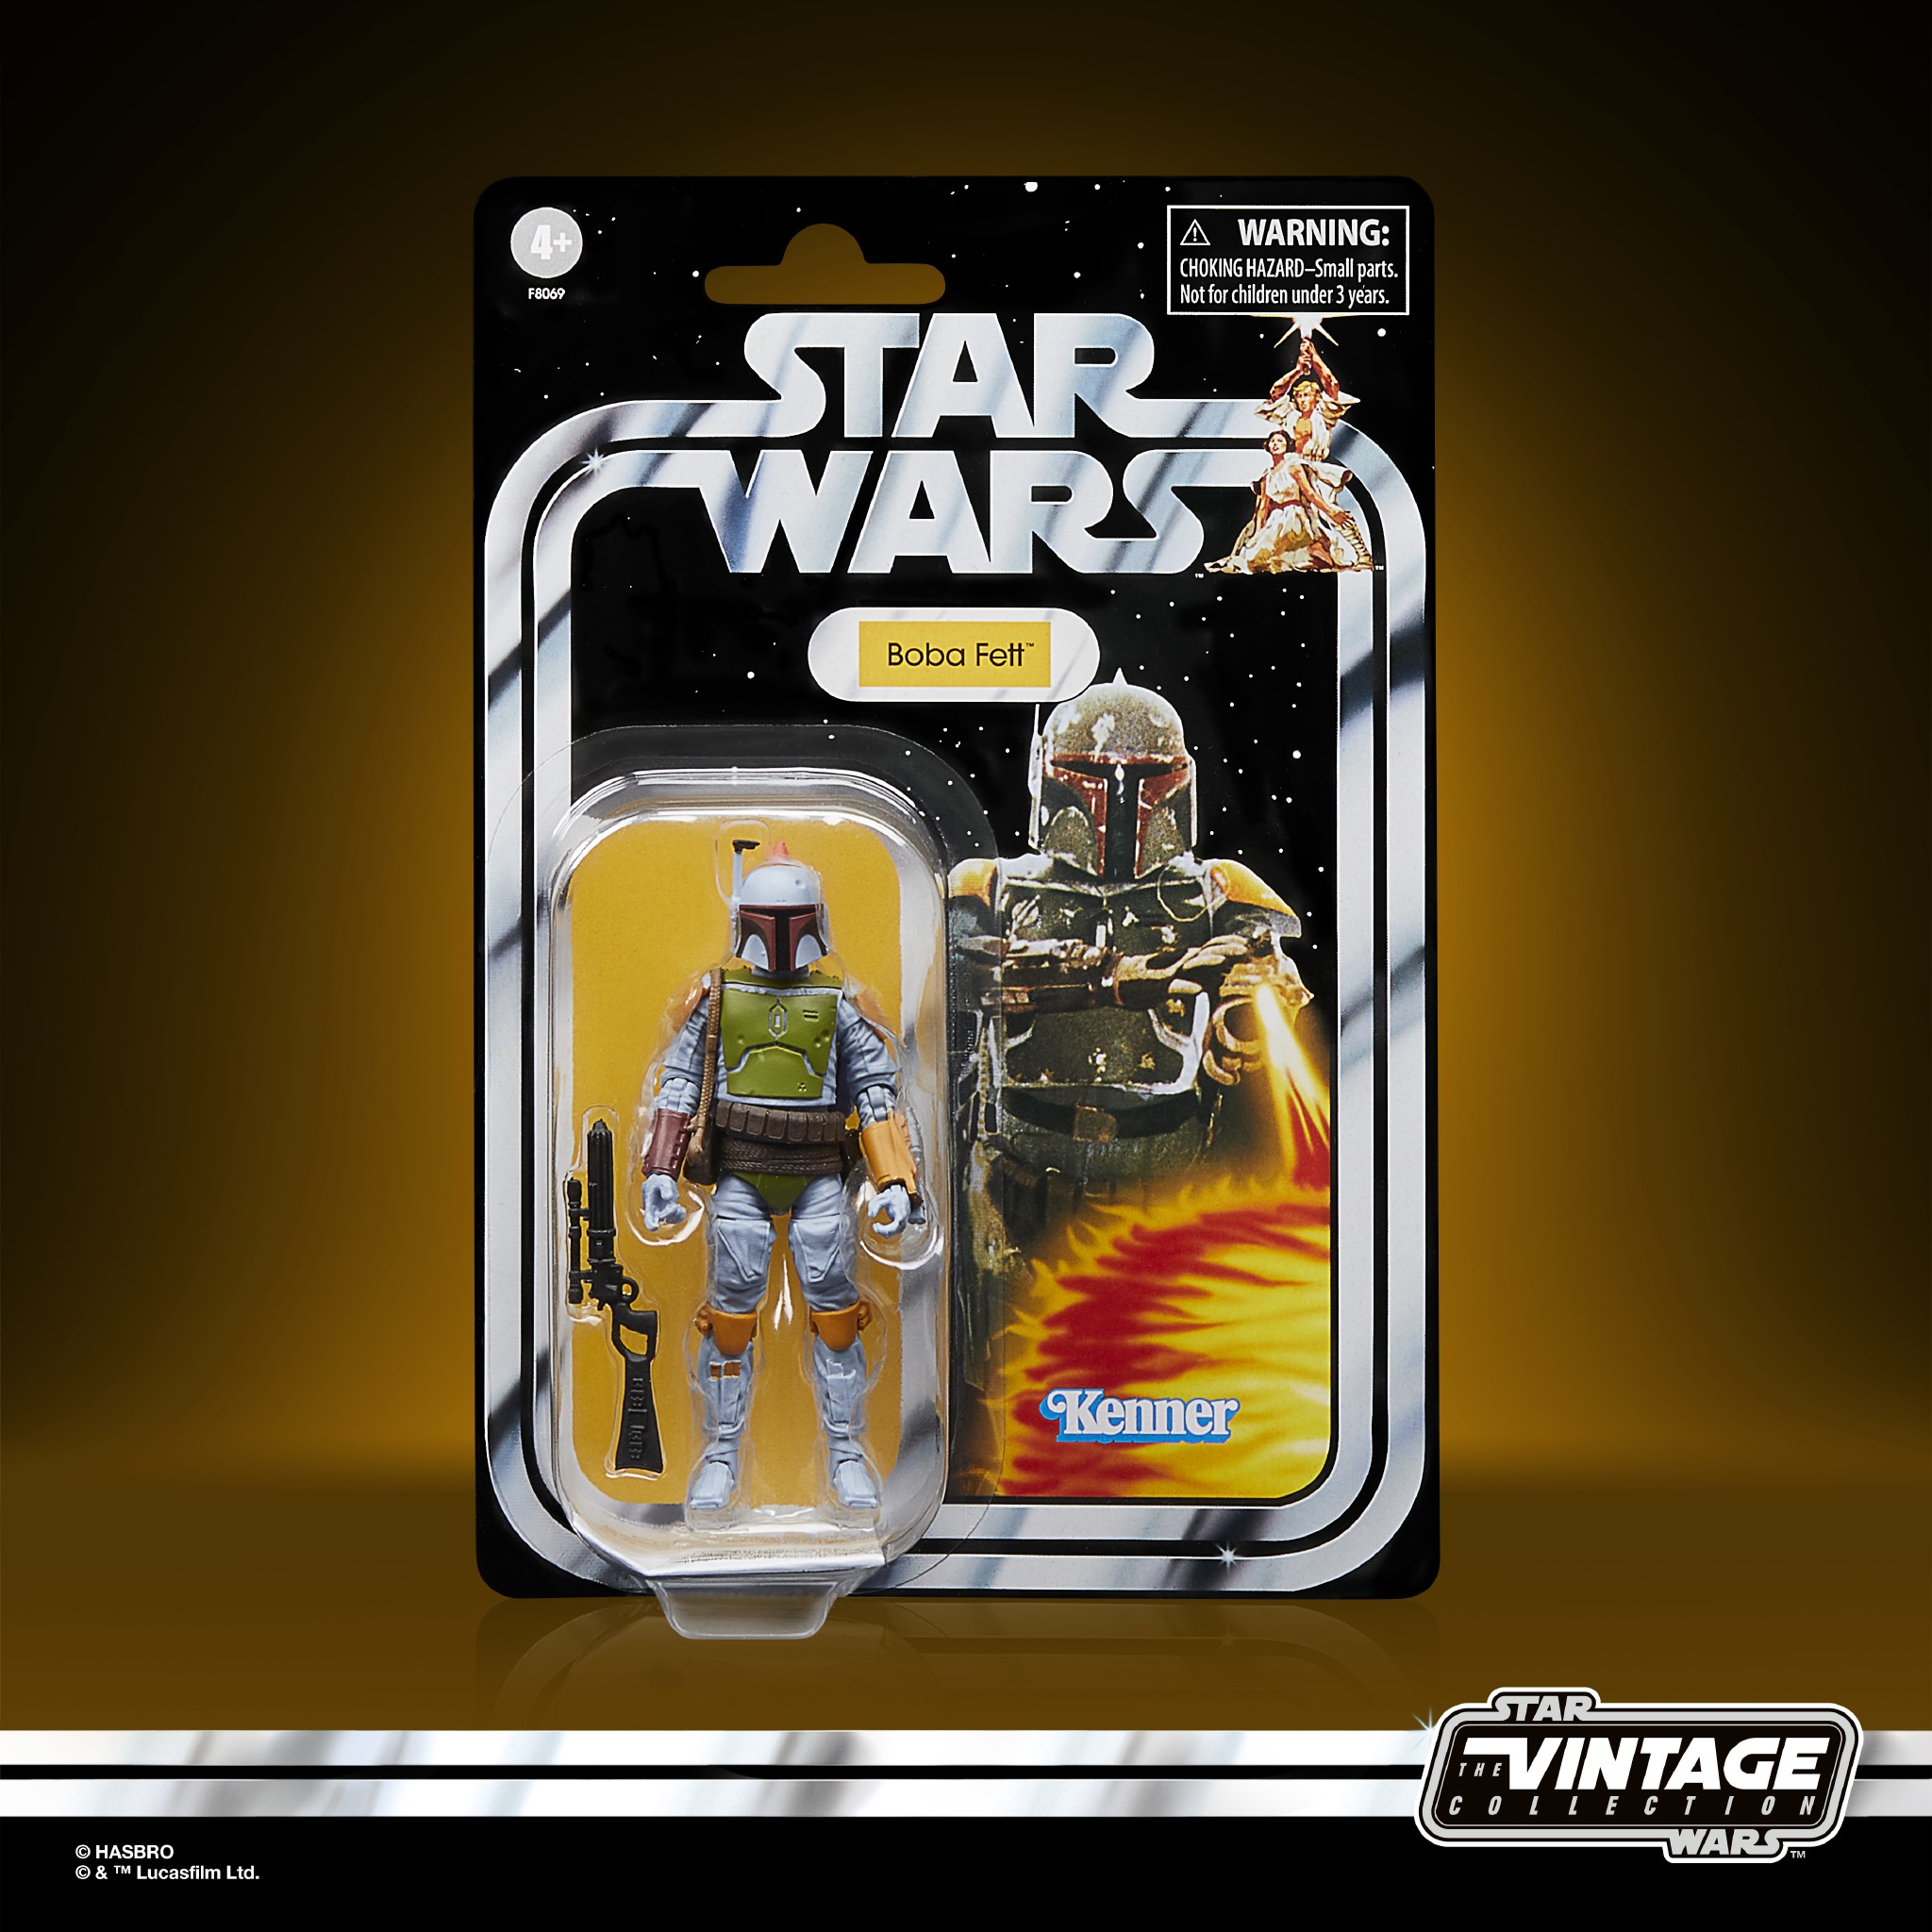 Star Wars Vintage Collection: New figures reveal Hasbro's dedication to higher prices